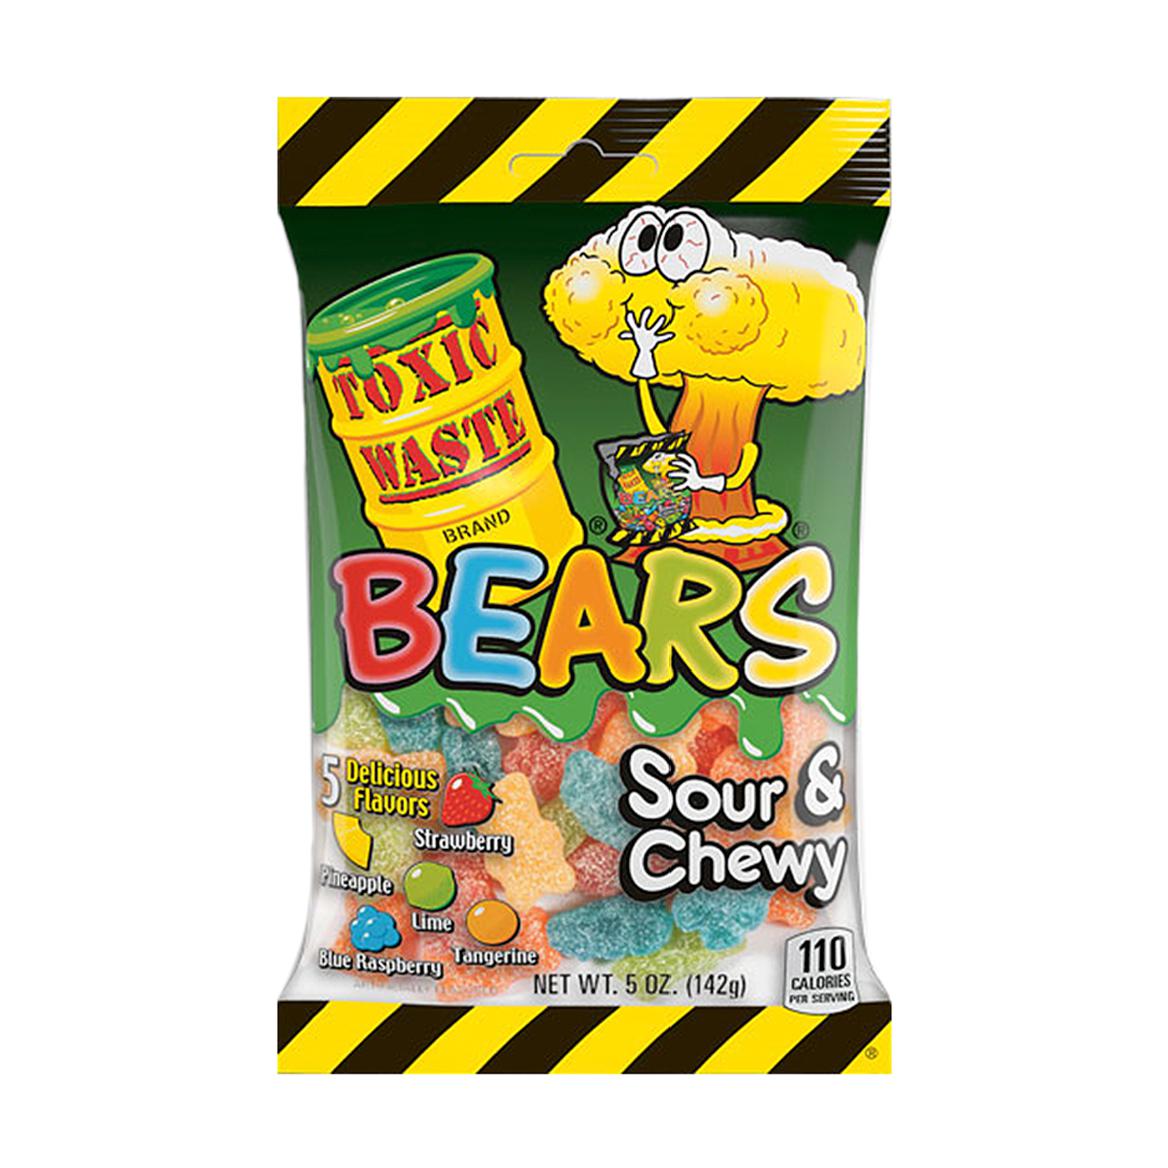 Toxic Waste Bears Sour and Chewy 142g - Candy Mail UK